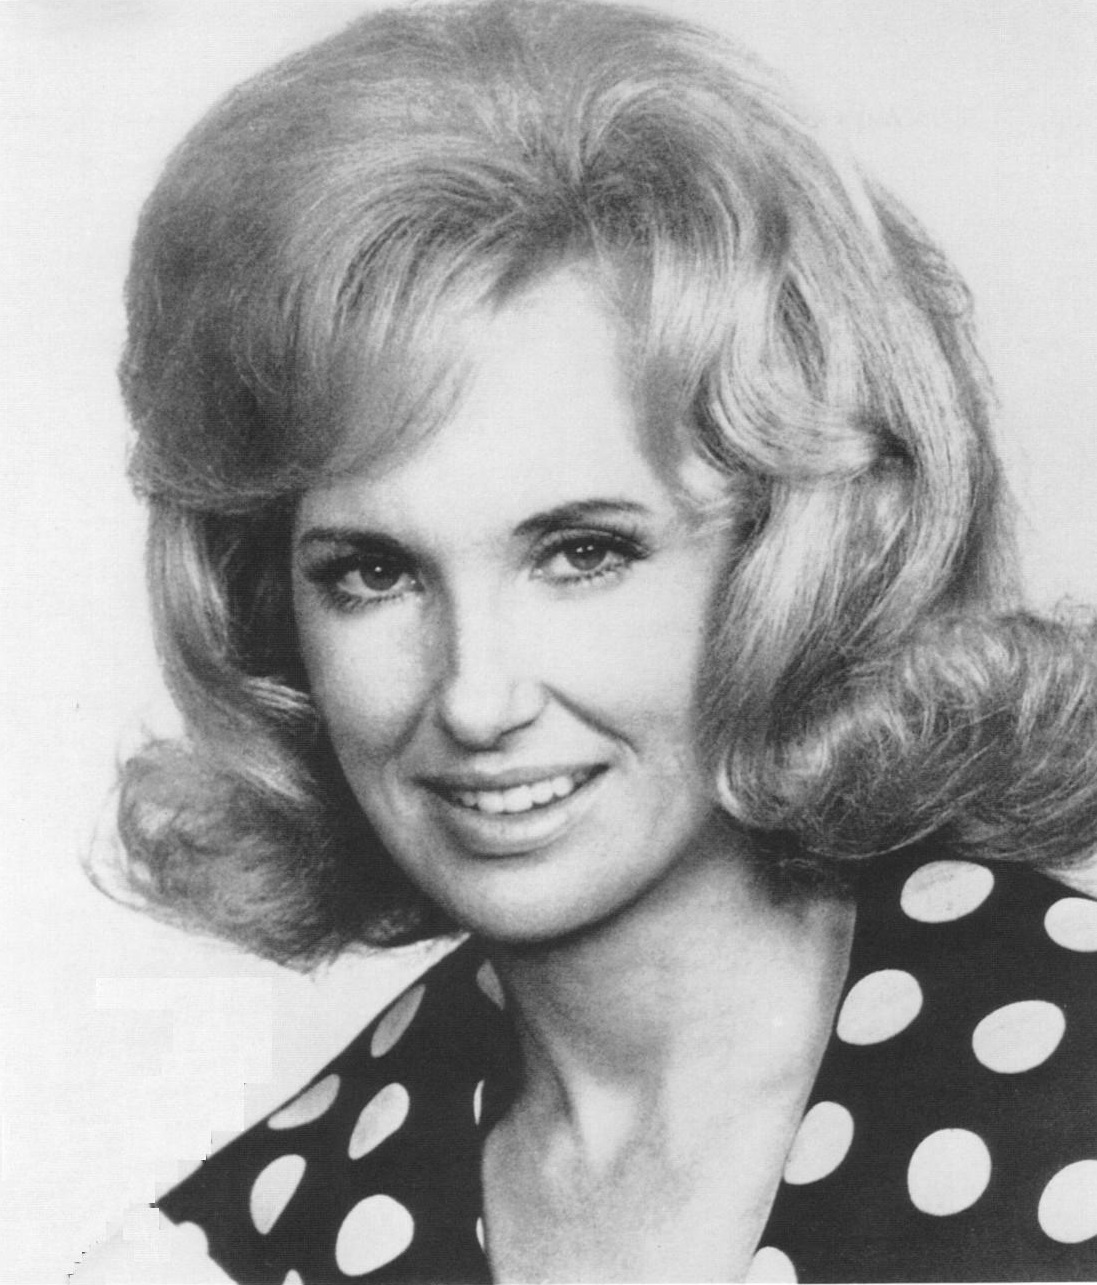 Old photo of Tammy Wynette Smiling